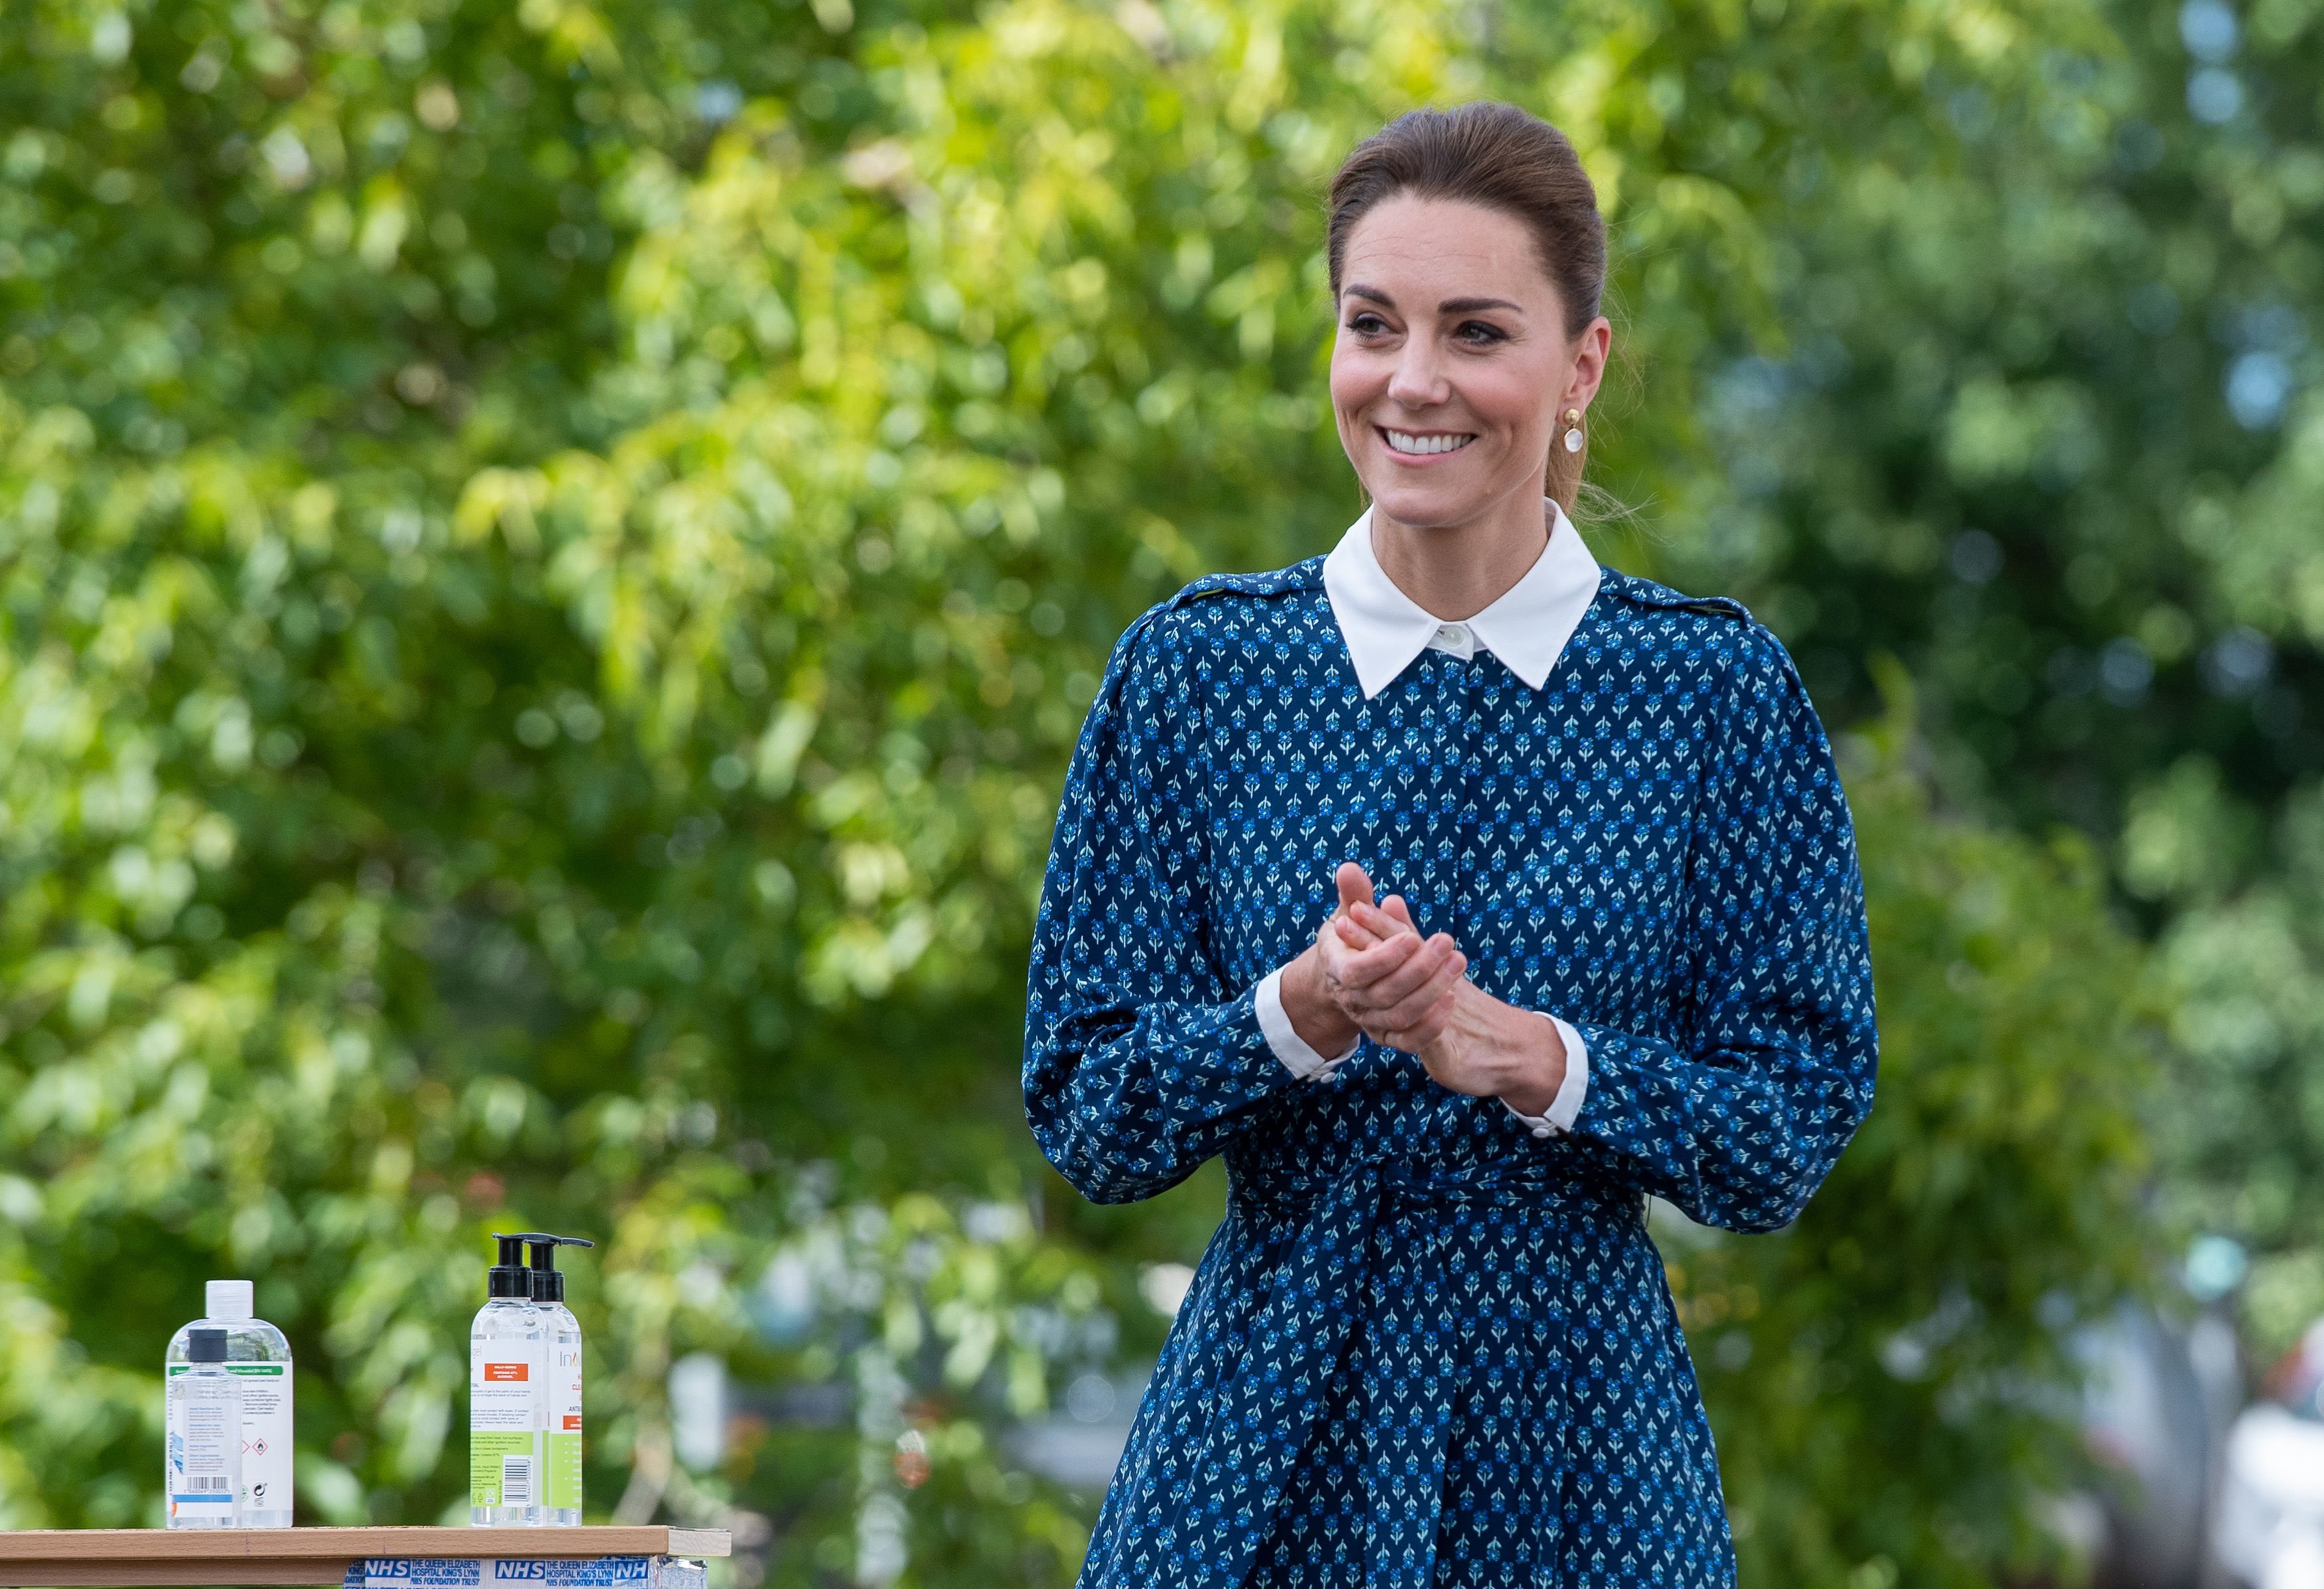 Catherine, Duchess of Cambridge applies hand sanitizer during a visit to Queen Elizabeth Hospital in King's Lynn as part of the NHS birthday celebrations on July 5, 2020 in Norfolk, England.  |  Source: Getty Images